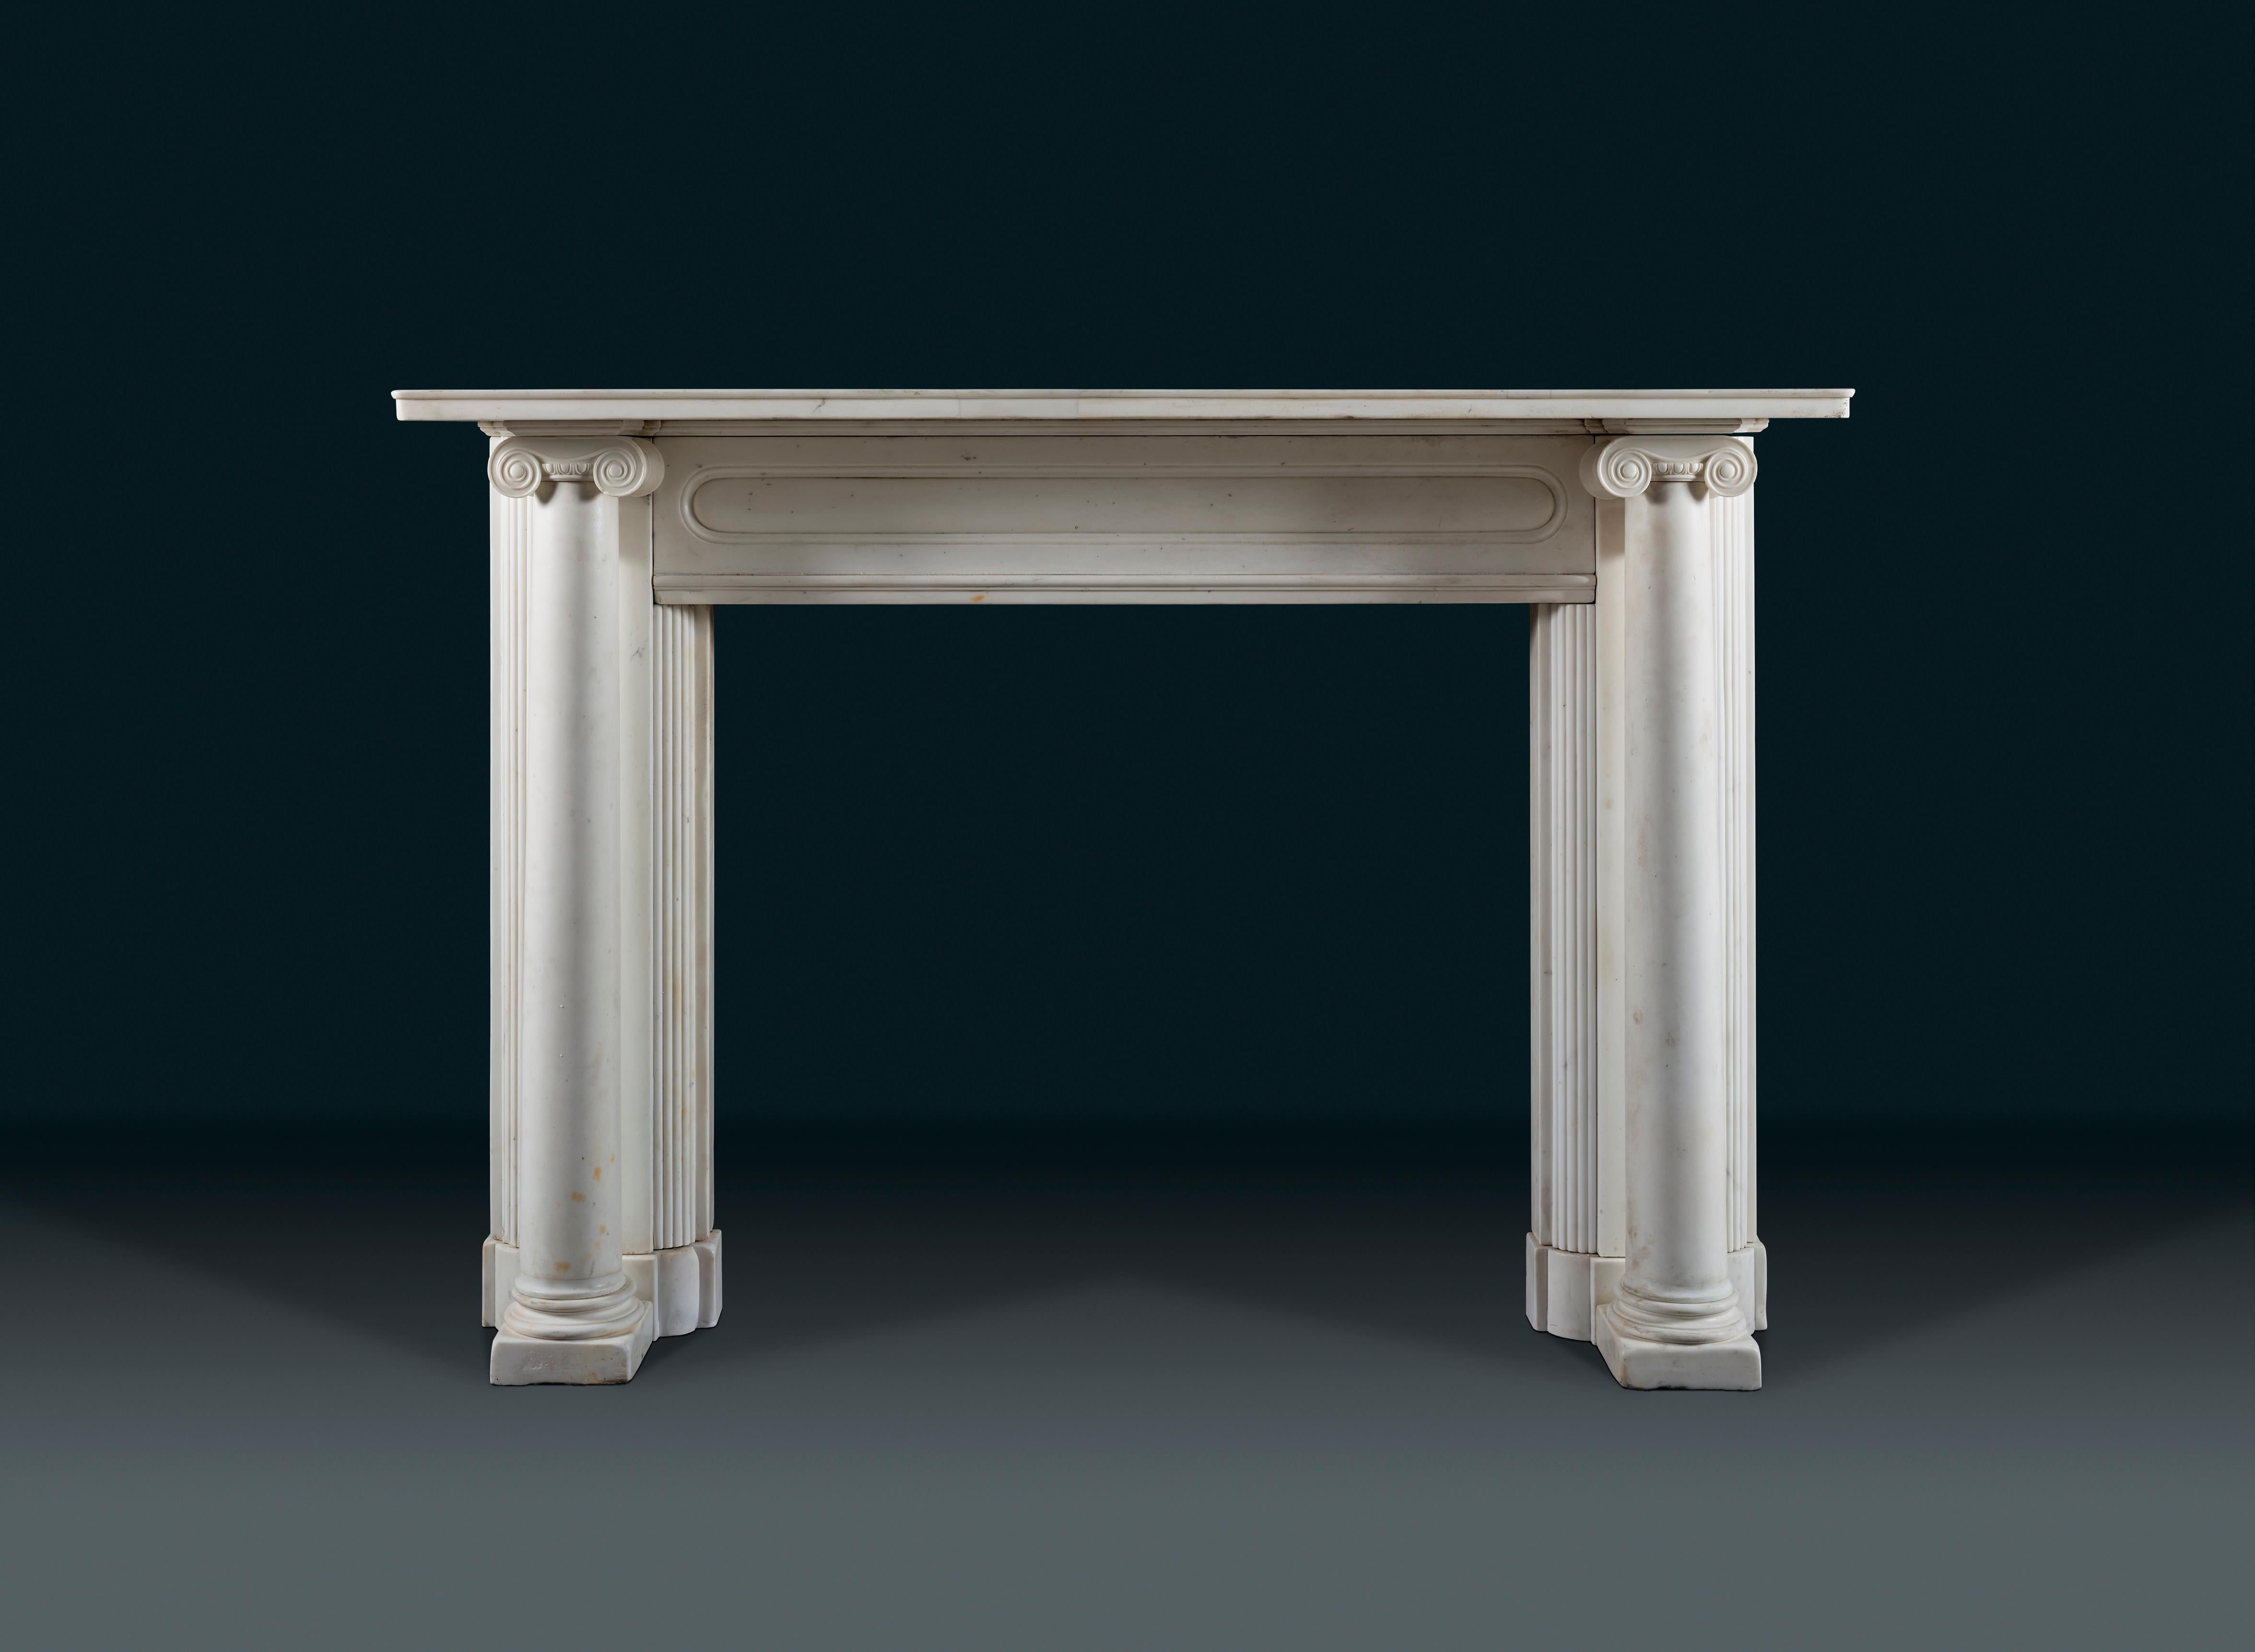 Carved A Statuary Marble Fireplace After Sir John Soane.